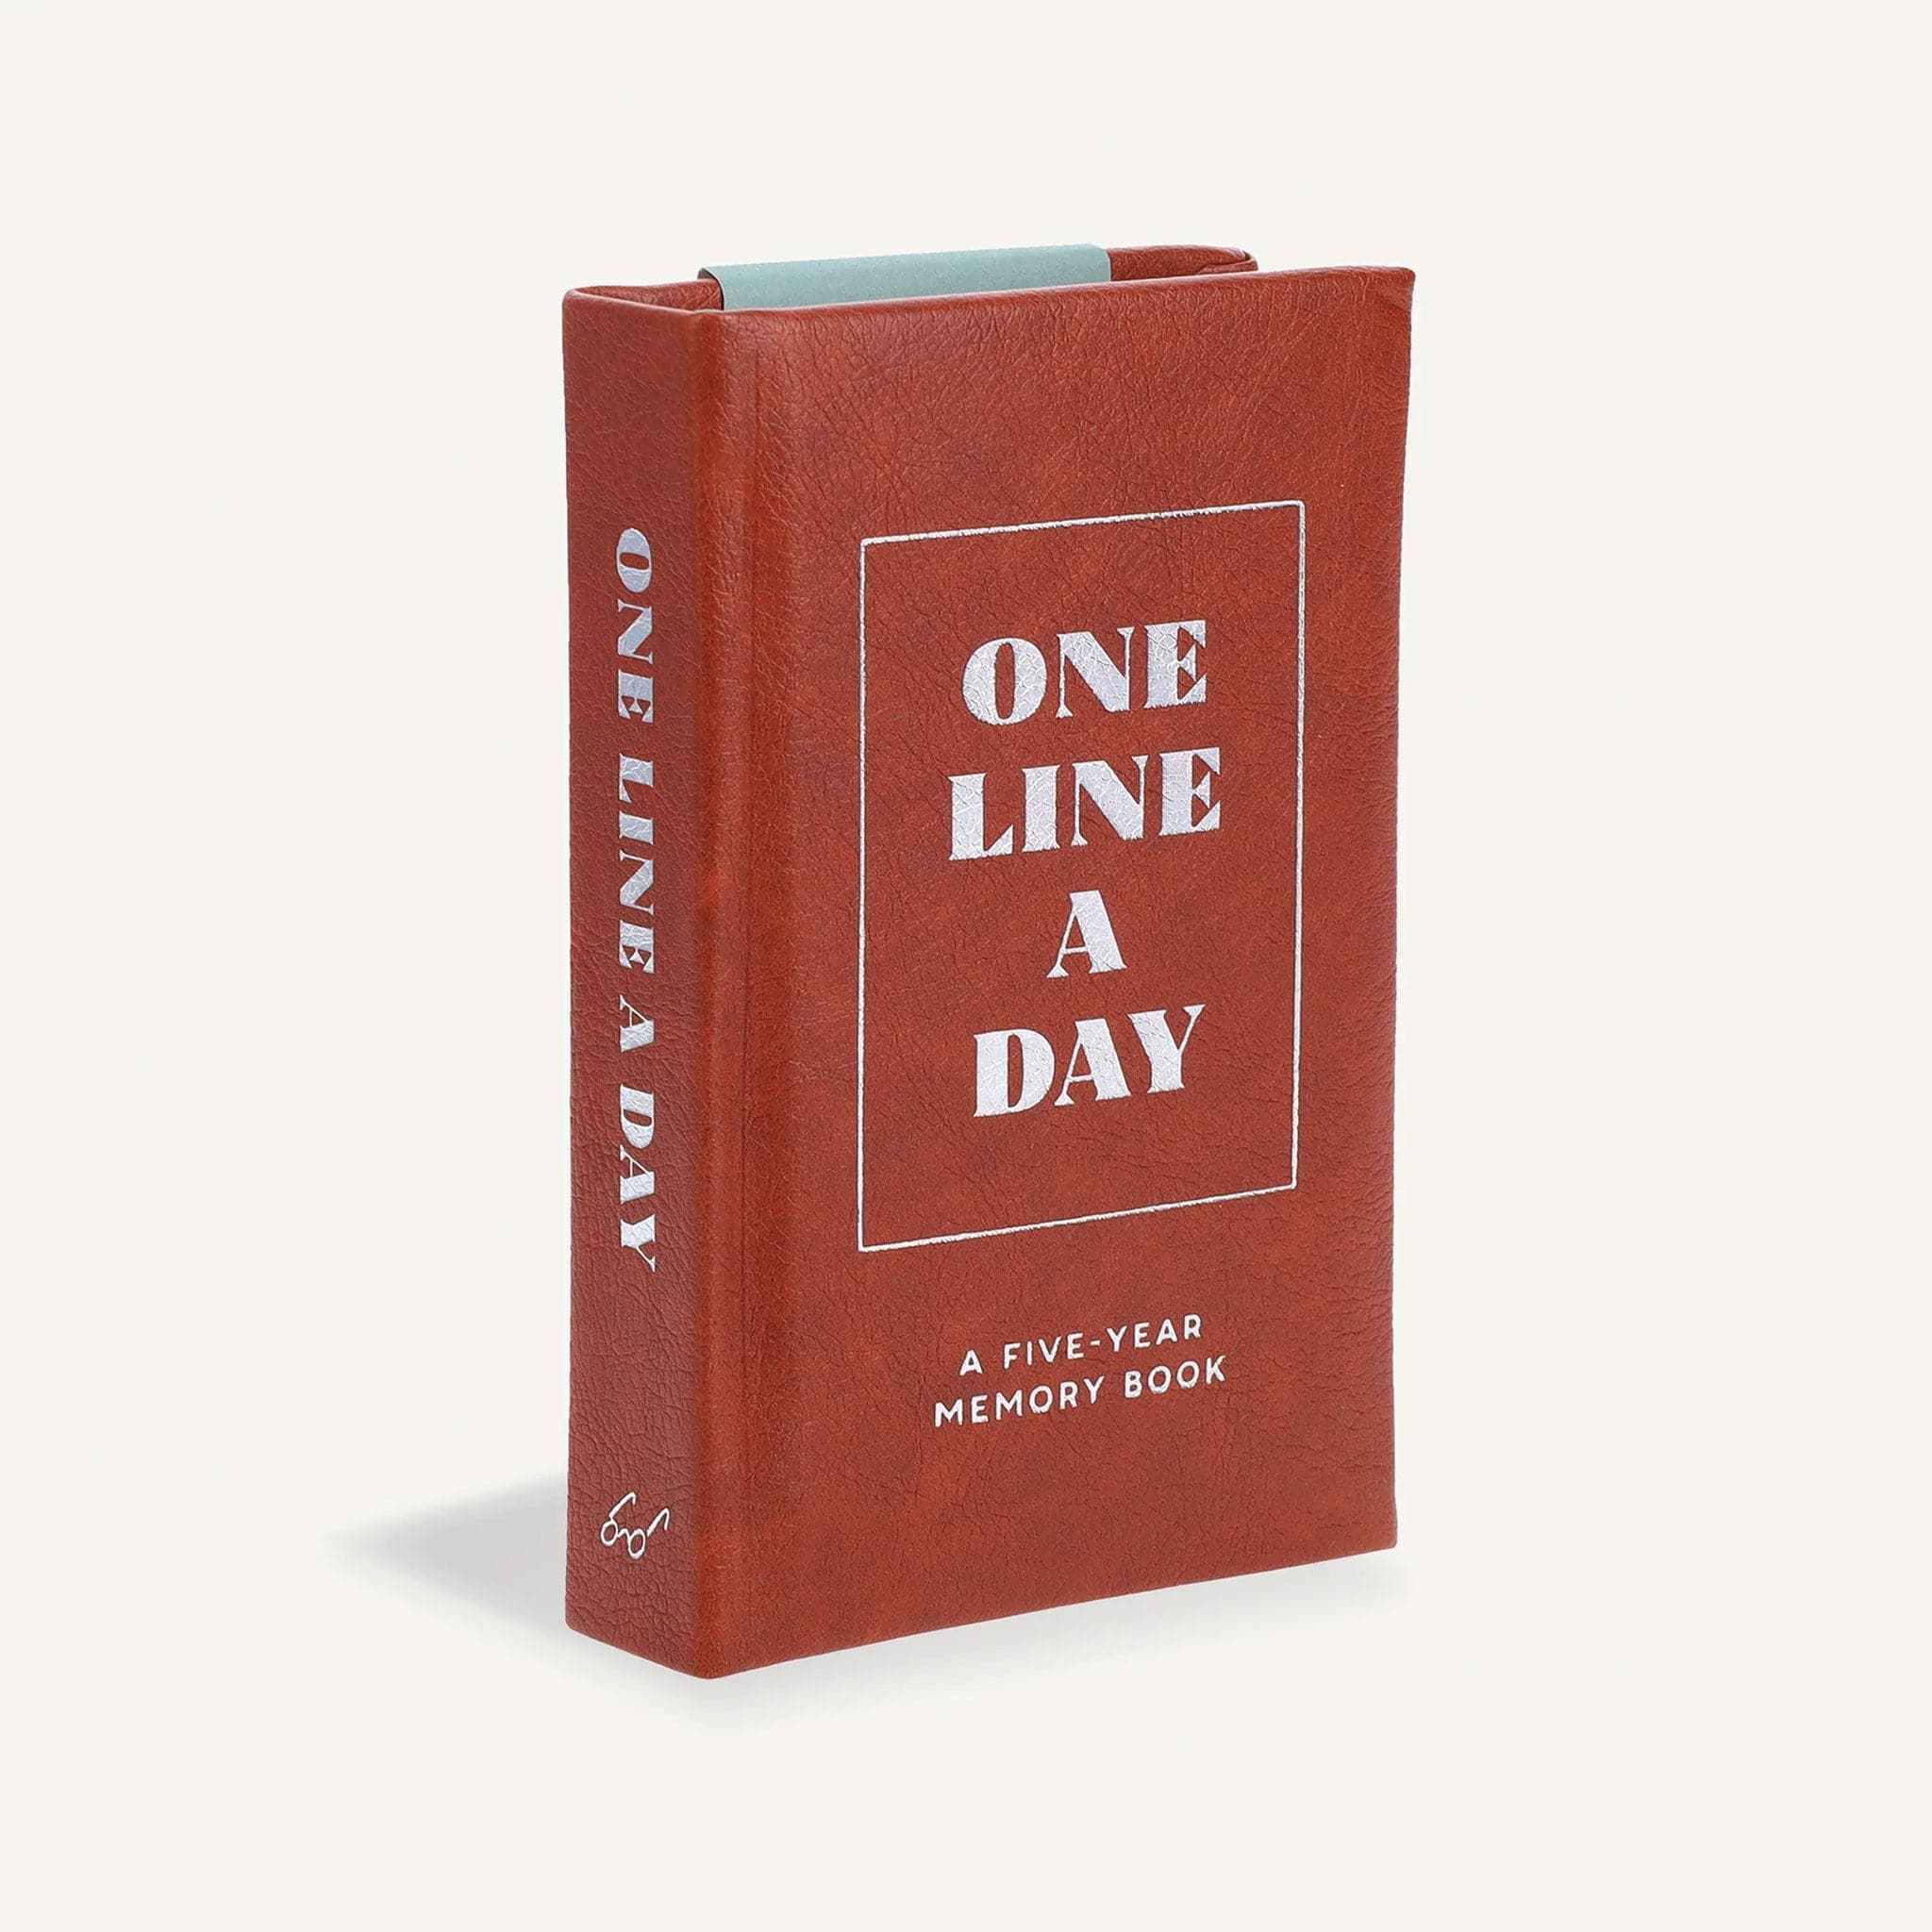 A brown vegan leather journal that says, "One Line A Day" on the front cover.